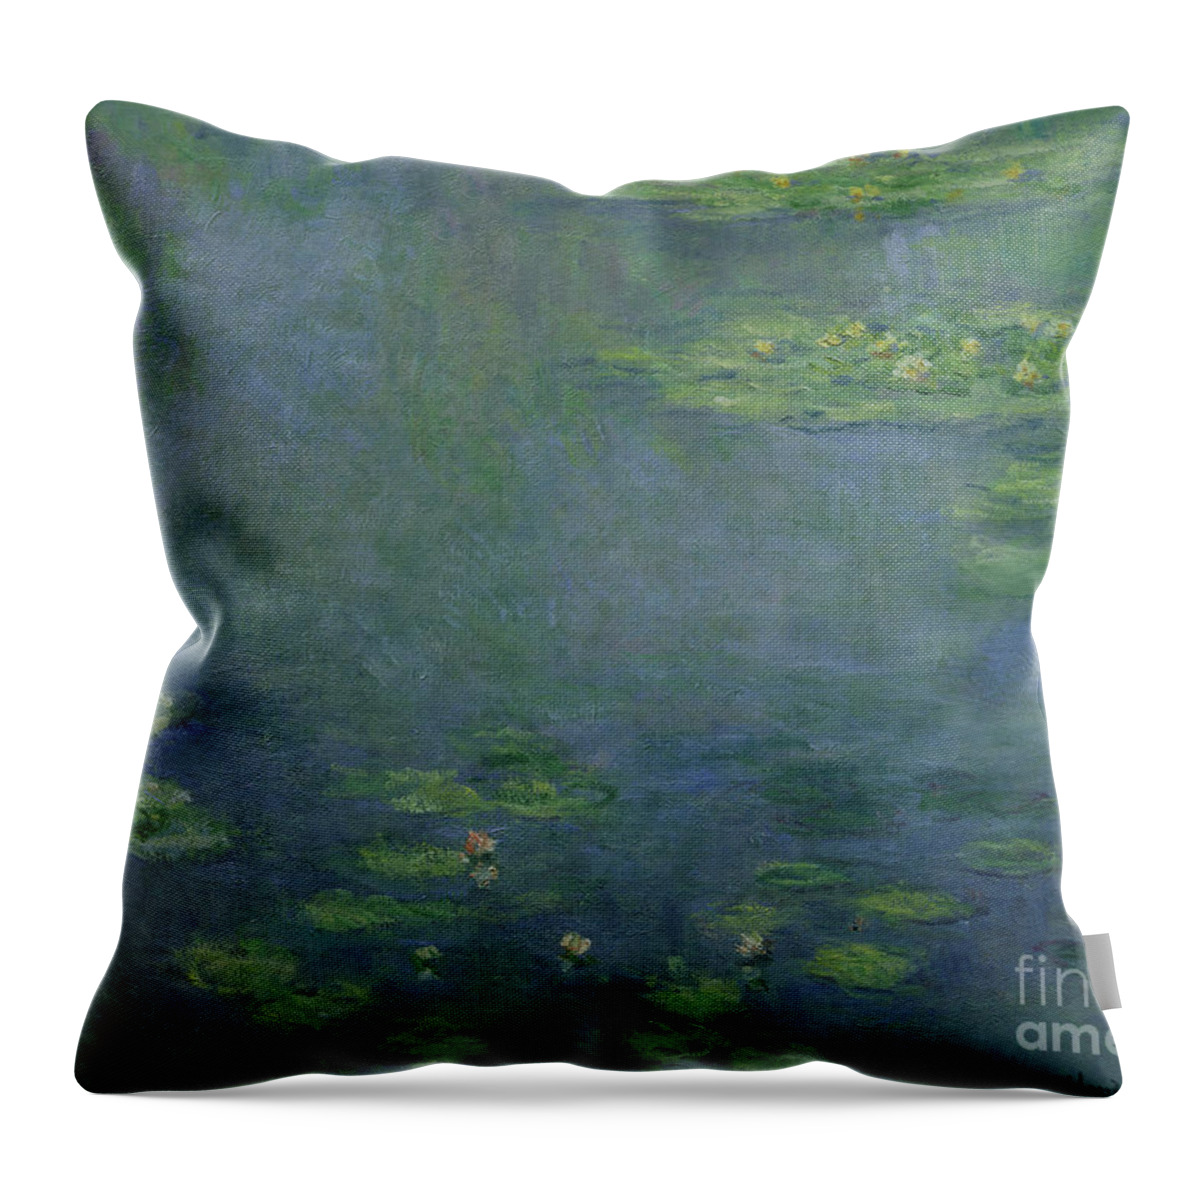 Waterlilies Throw Pillow featuring the painting Waterlilies by Claude Monet